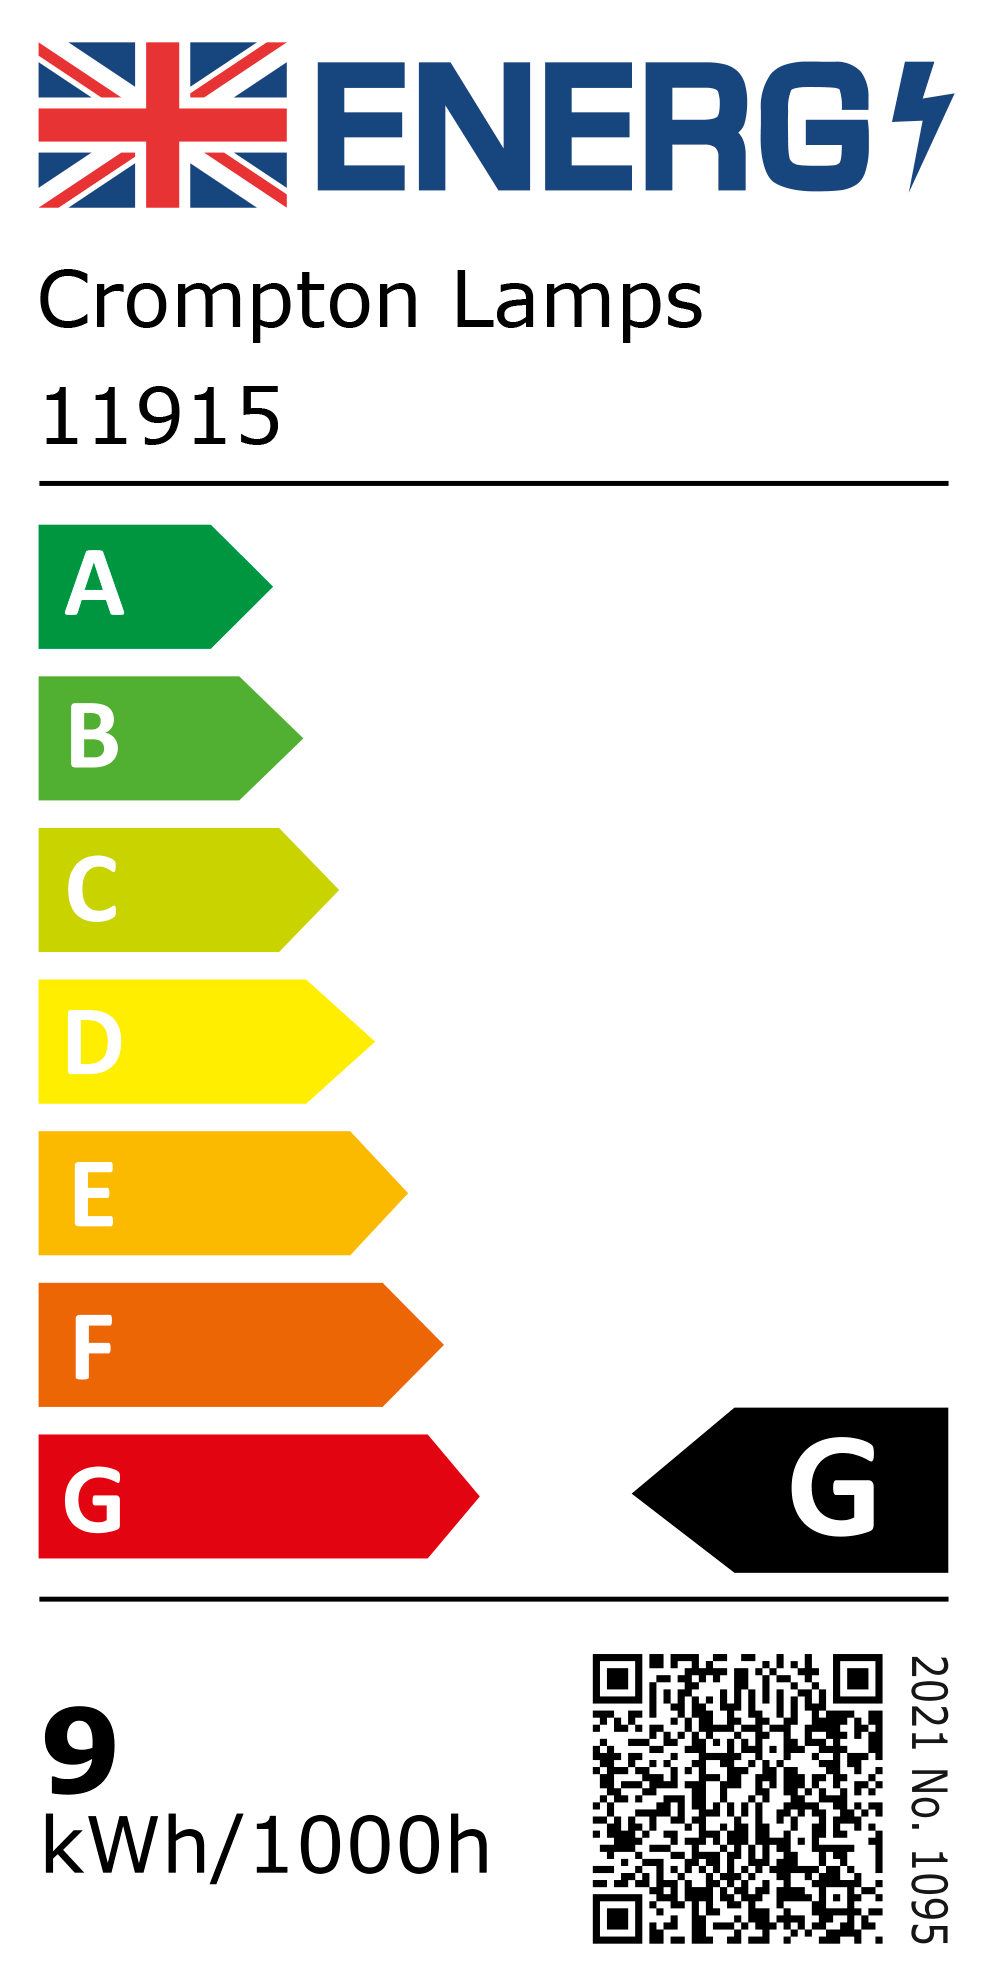 New 2021 Energy Rating Label: Stock Code 11915